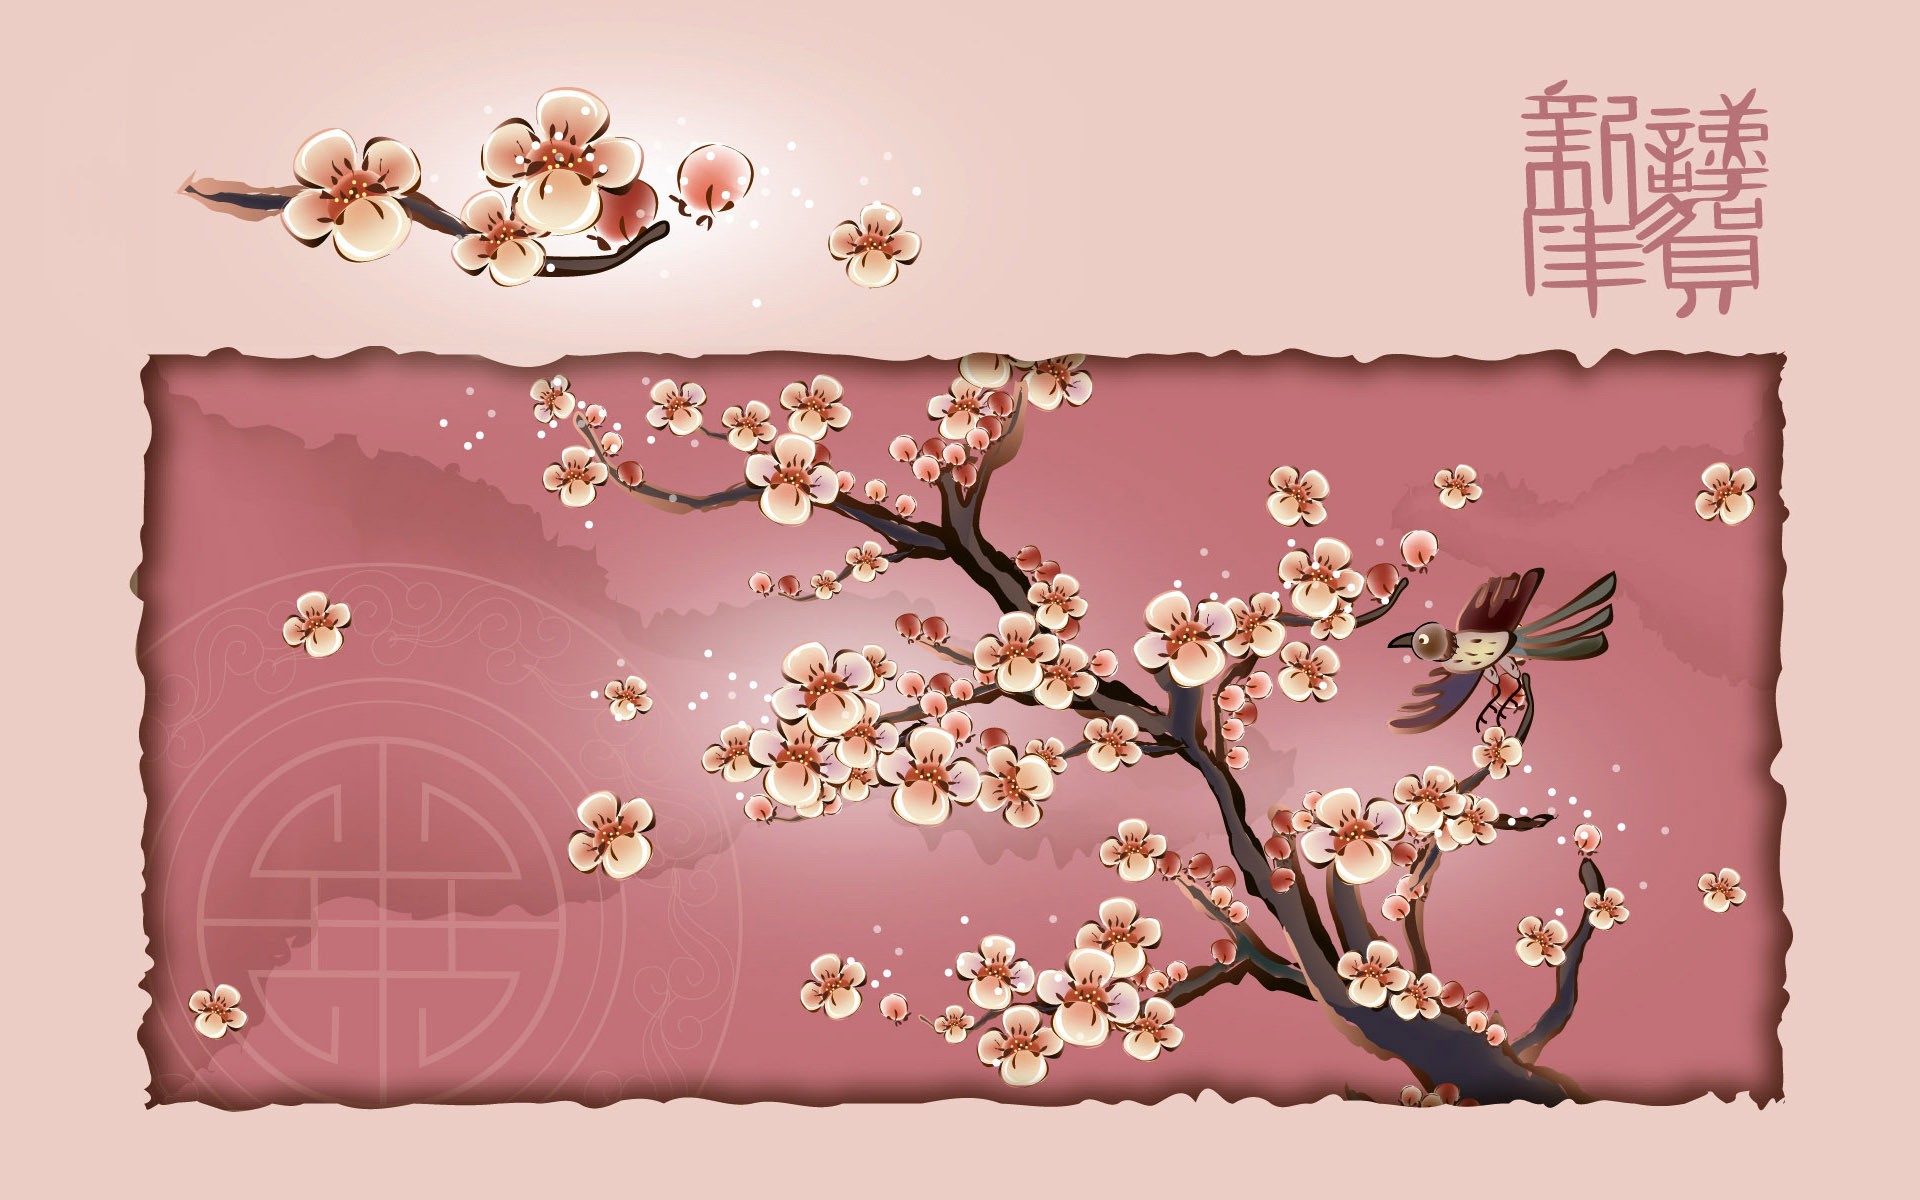 artistic oriental wallpapers wallpaper images 1920x1200